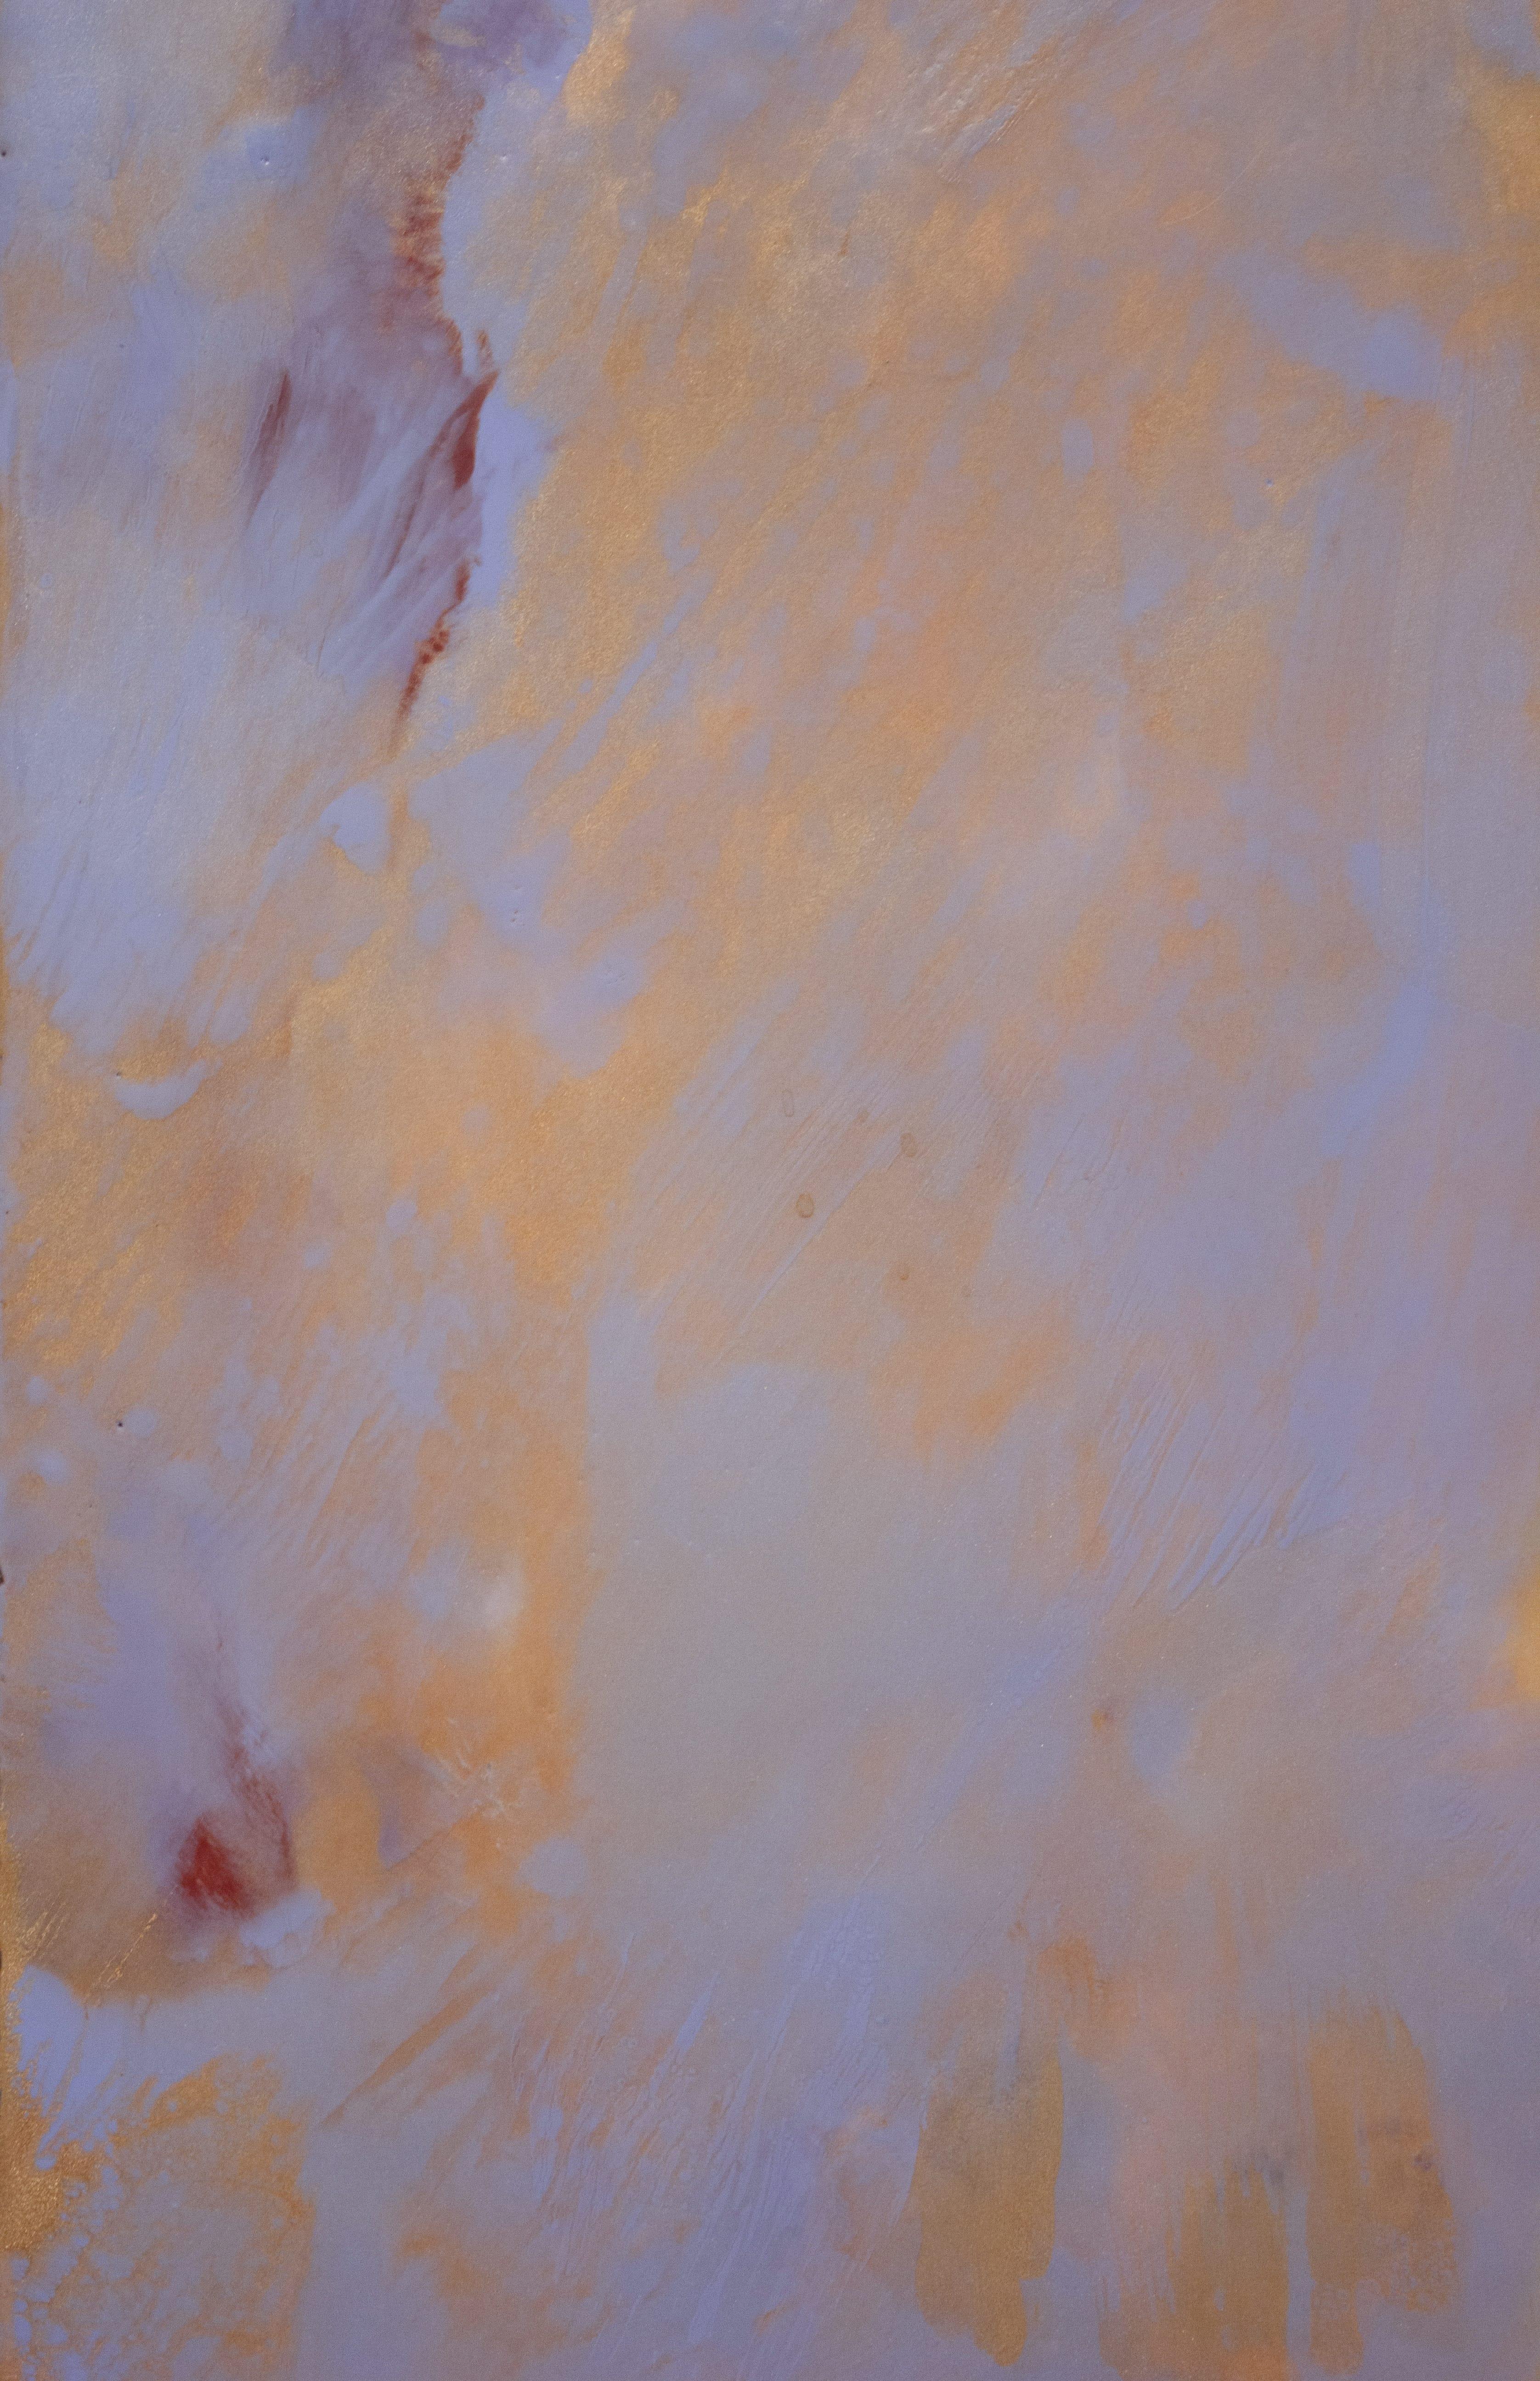 A vertical encaustic painting in vibrant purple, blue, orange and gold by Pamela Gibson. Gibson's abstract work often references the natural world, and the unique dimensions of this work combined with its beautiful color palette form an image